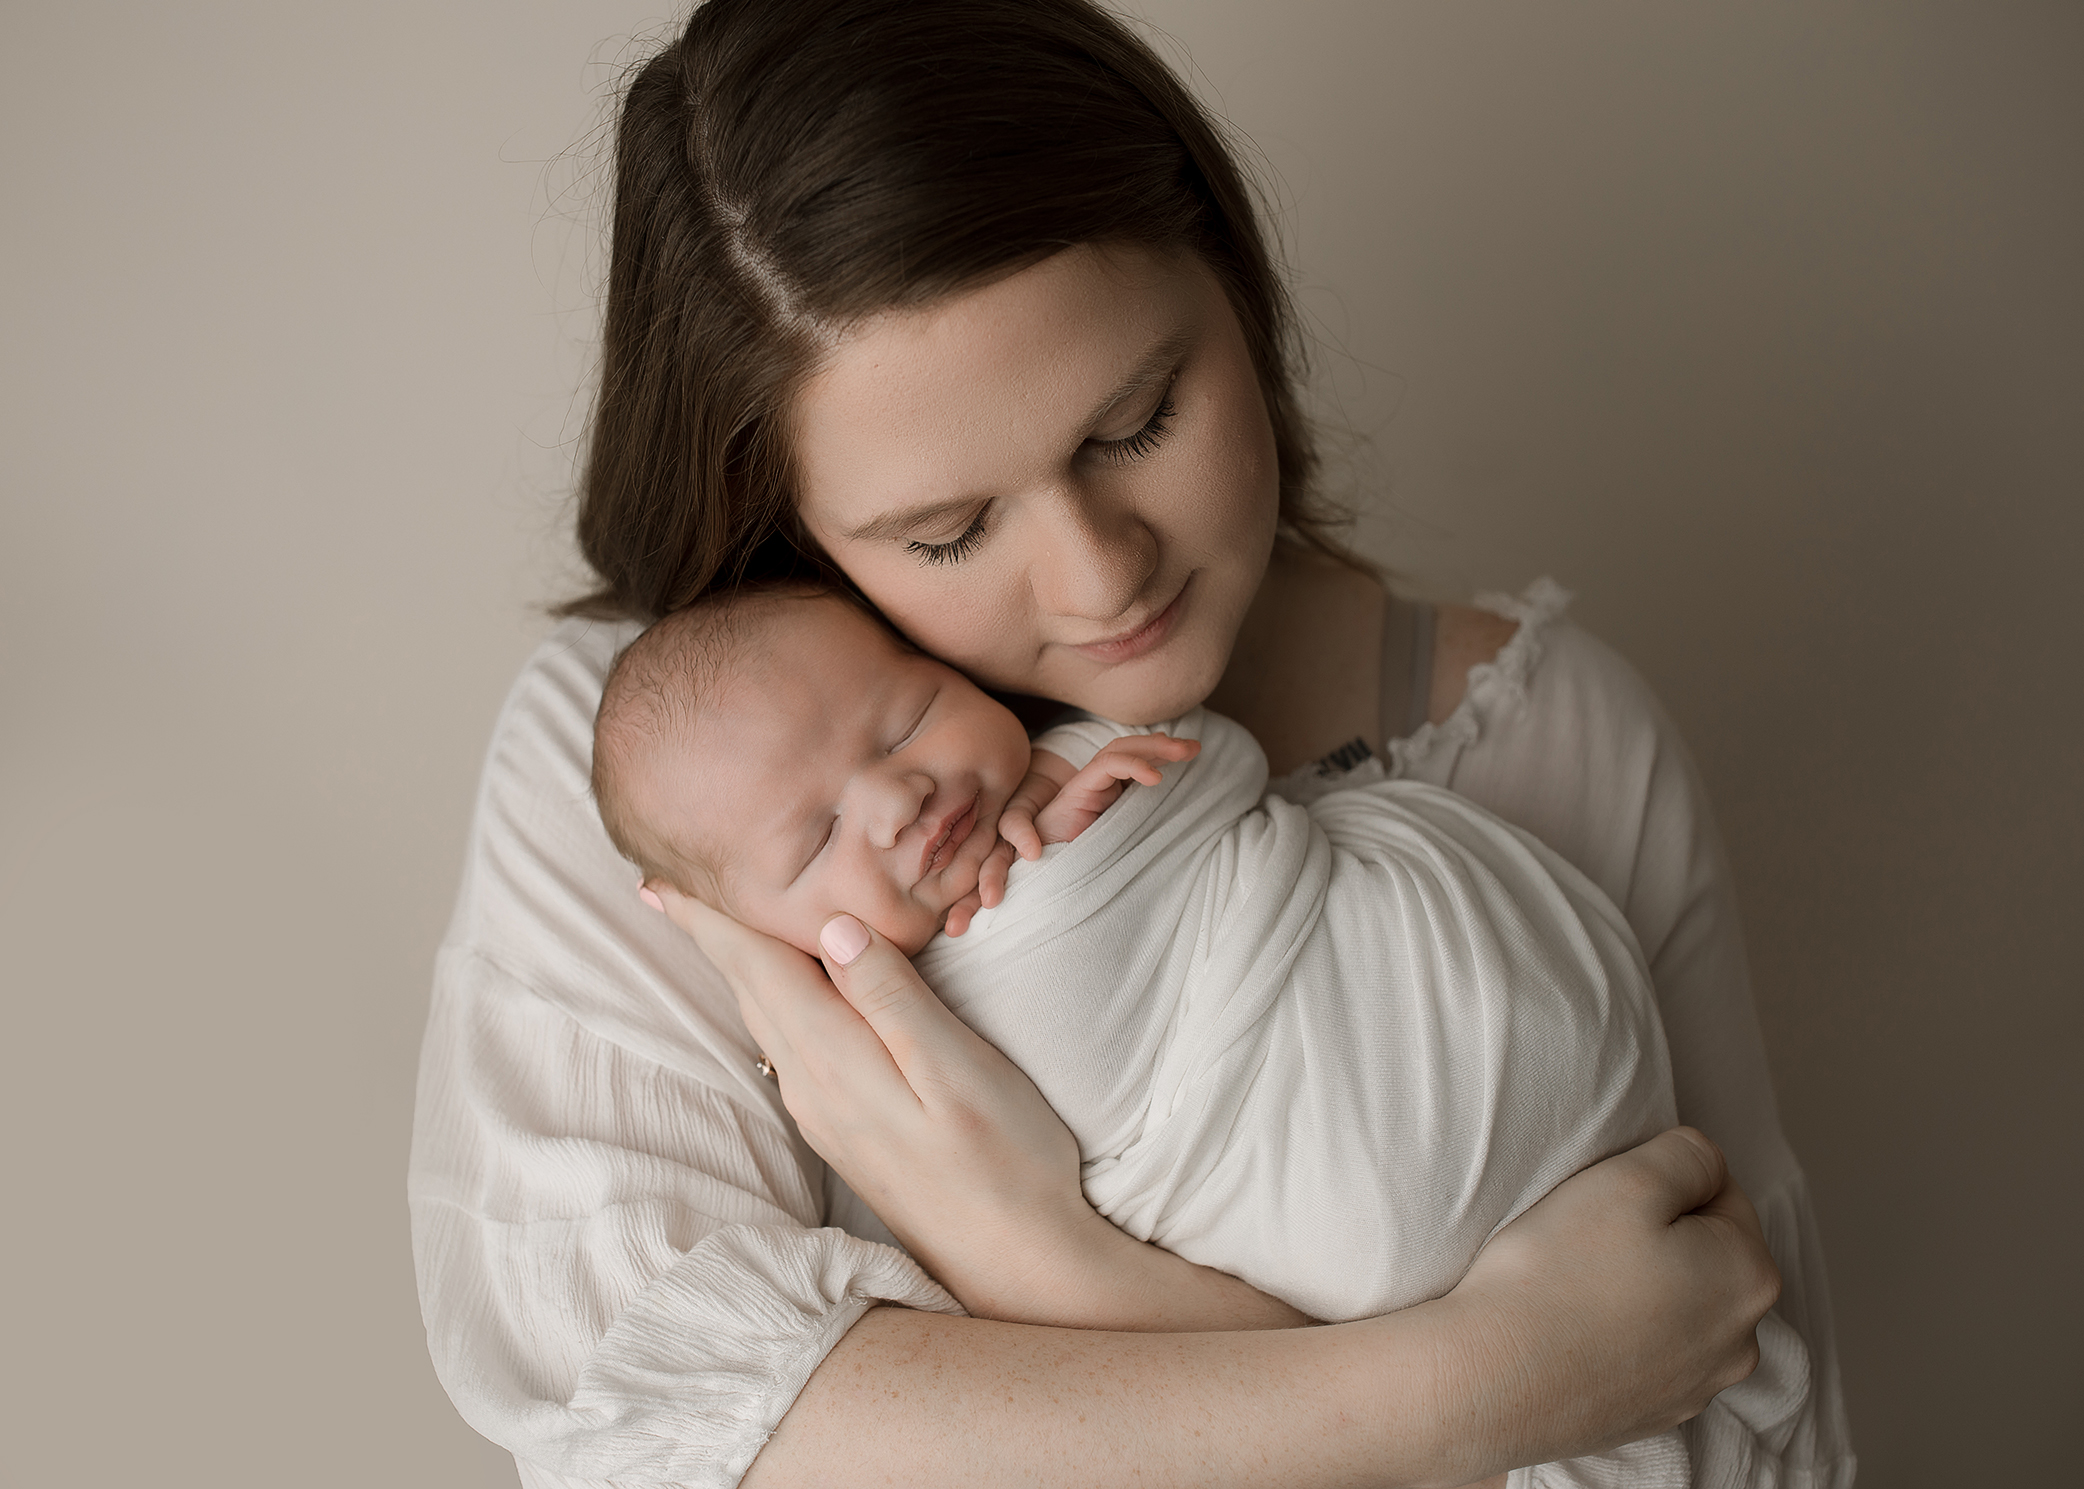 When is the Perfect Time for a Newborn Photoshoot?